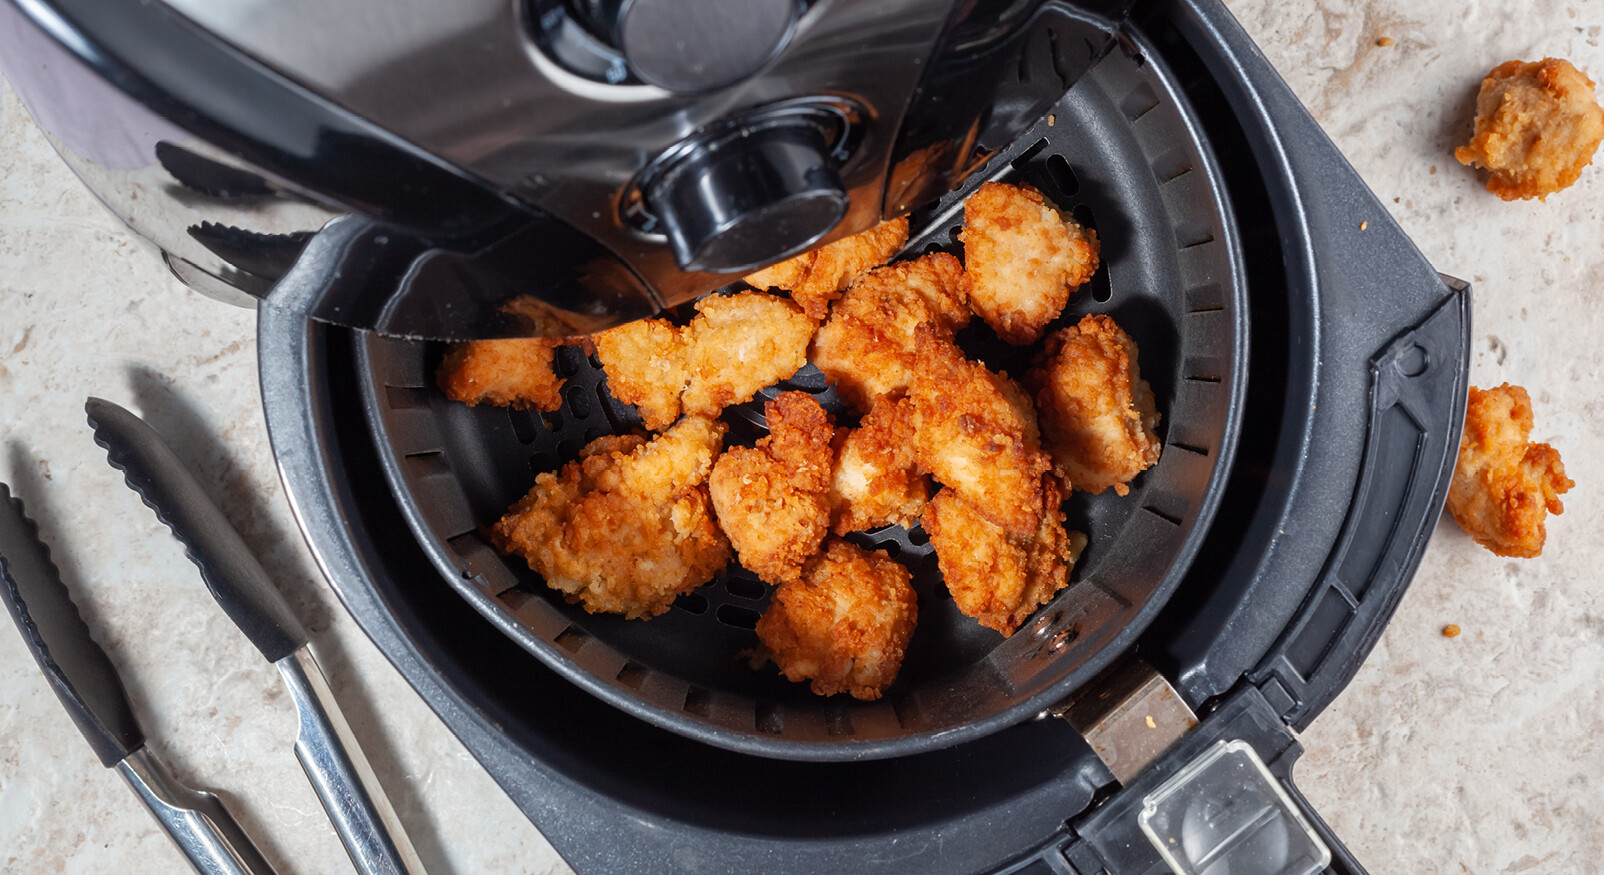 Cooking with the Airfryer